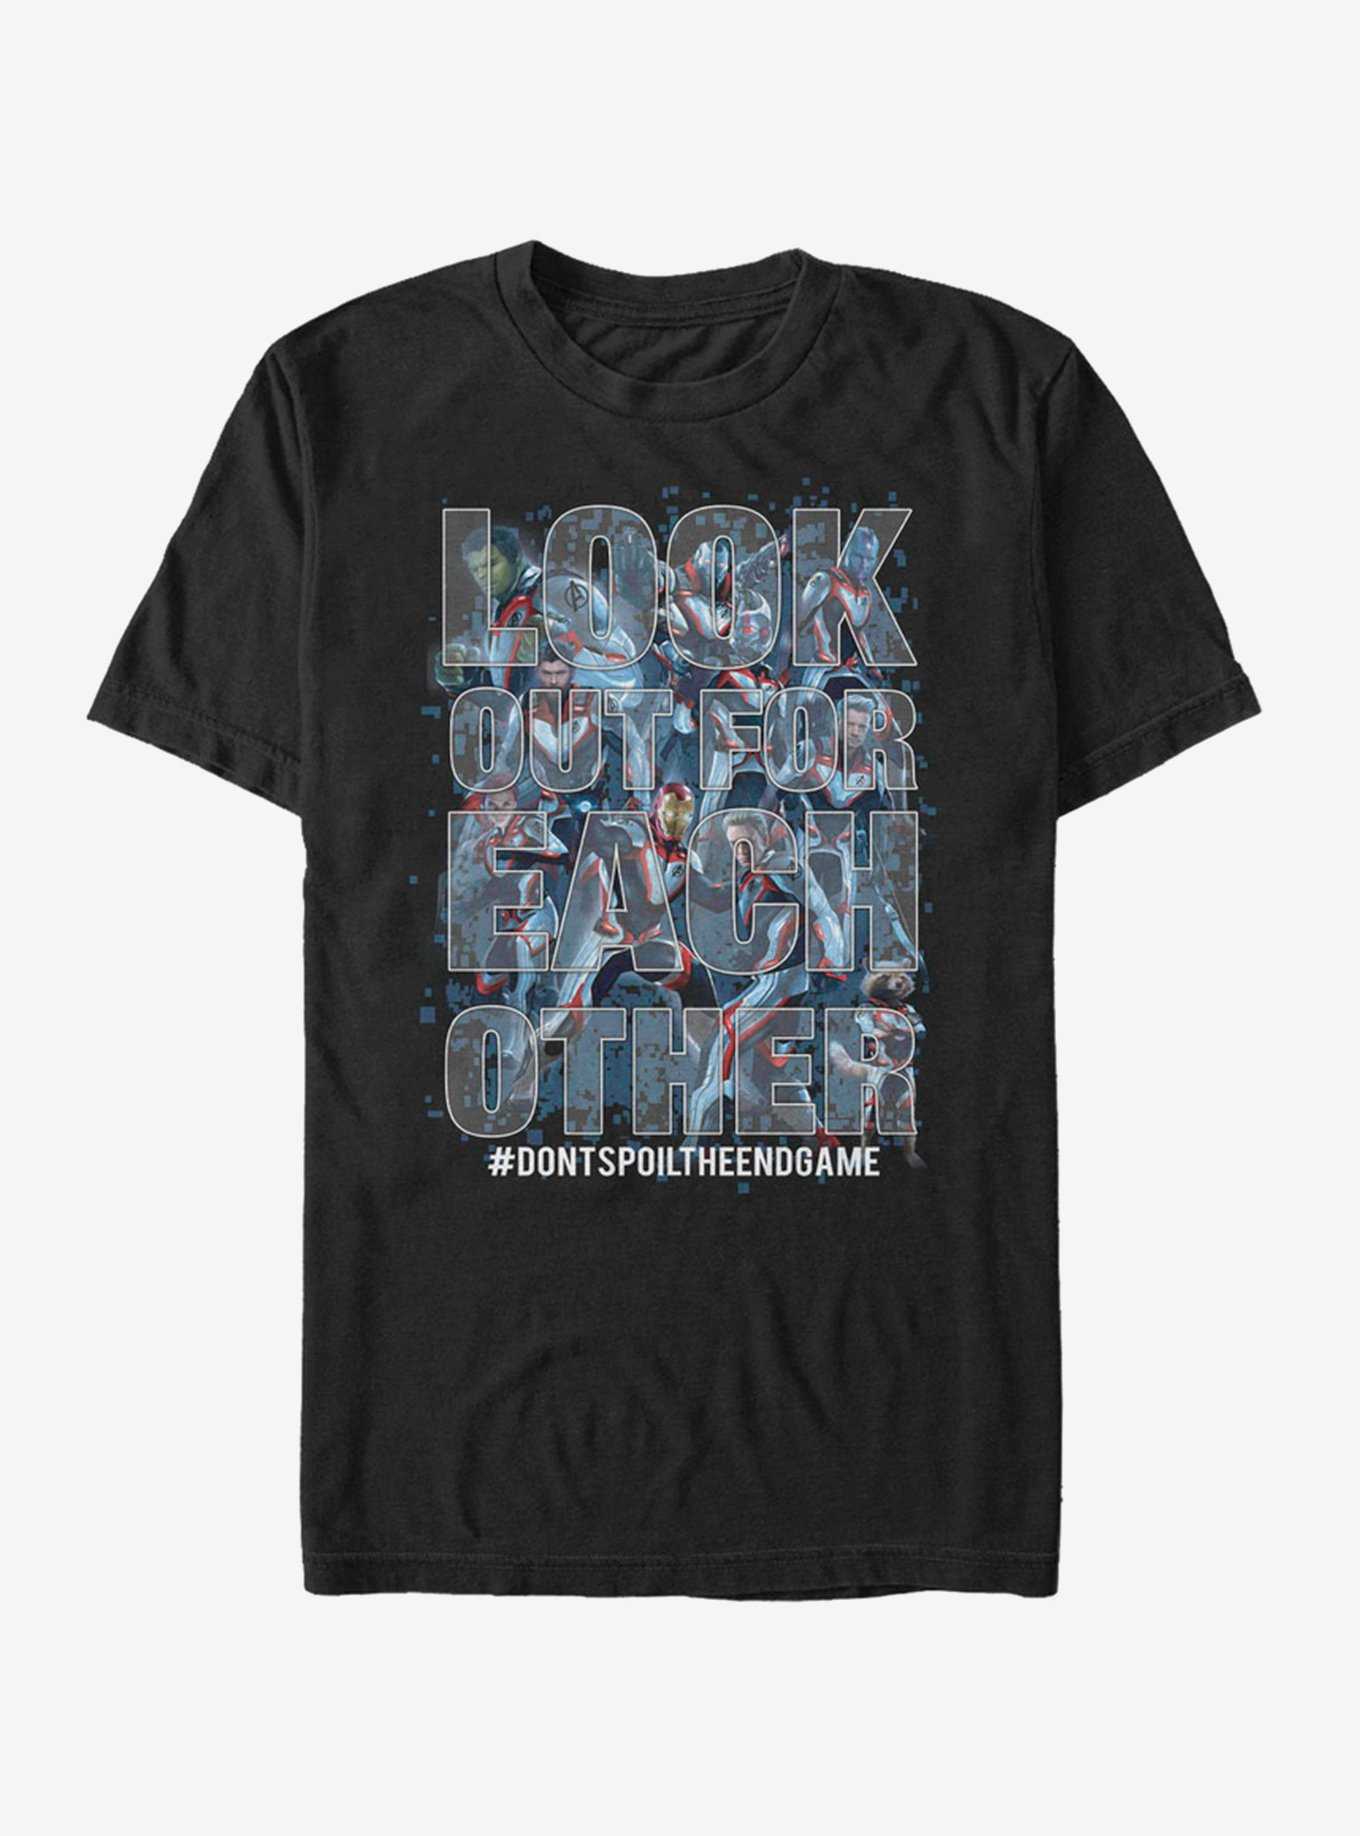 Marvel Avengers: Endgame Look Out For Each Other T-Shirt, , hi-res